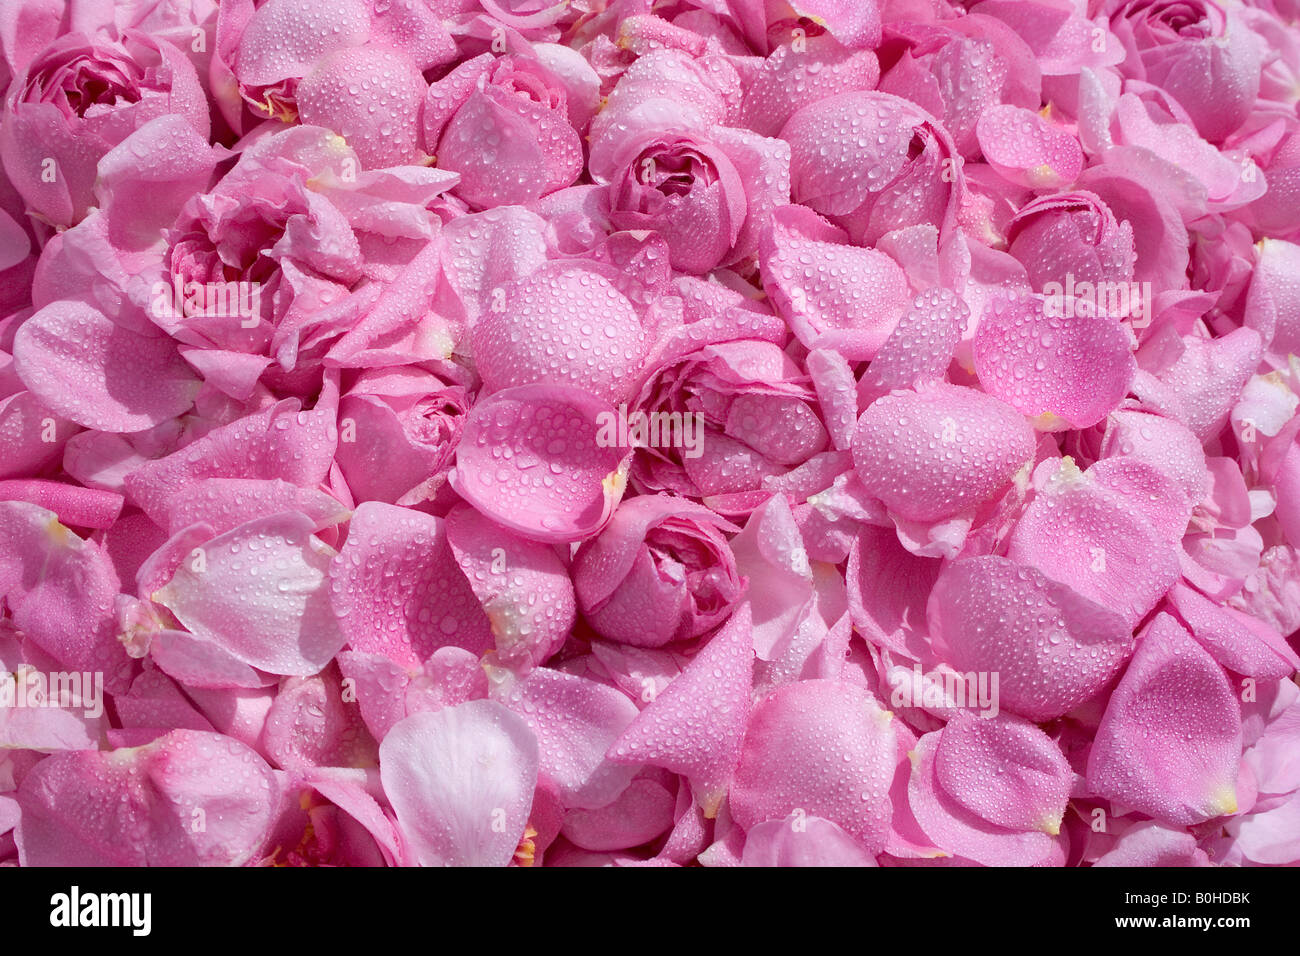 Pink Provence Rose or Cabbage Rose petals (Rosa x centifolia) gathered for medicinal use, Taubertal Valley, Germany Stock Photo